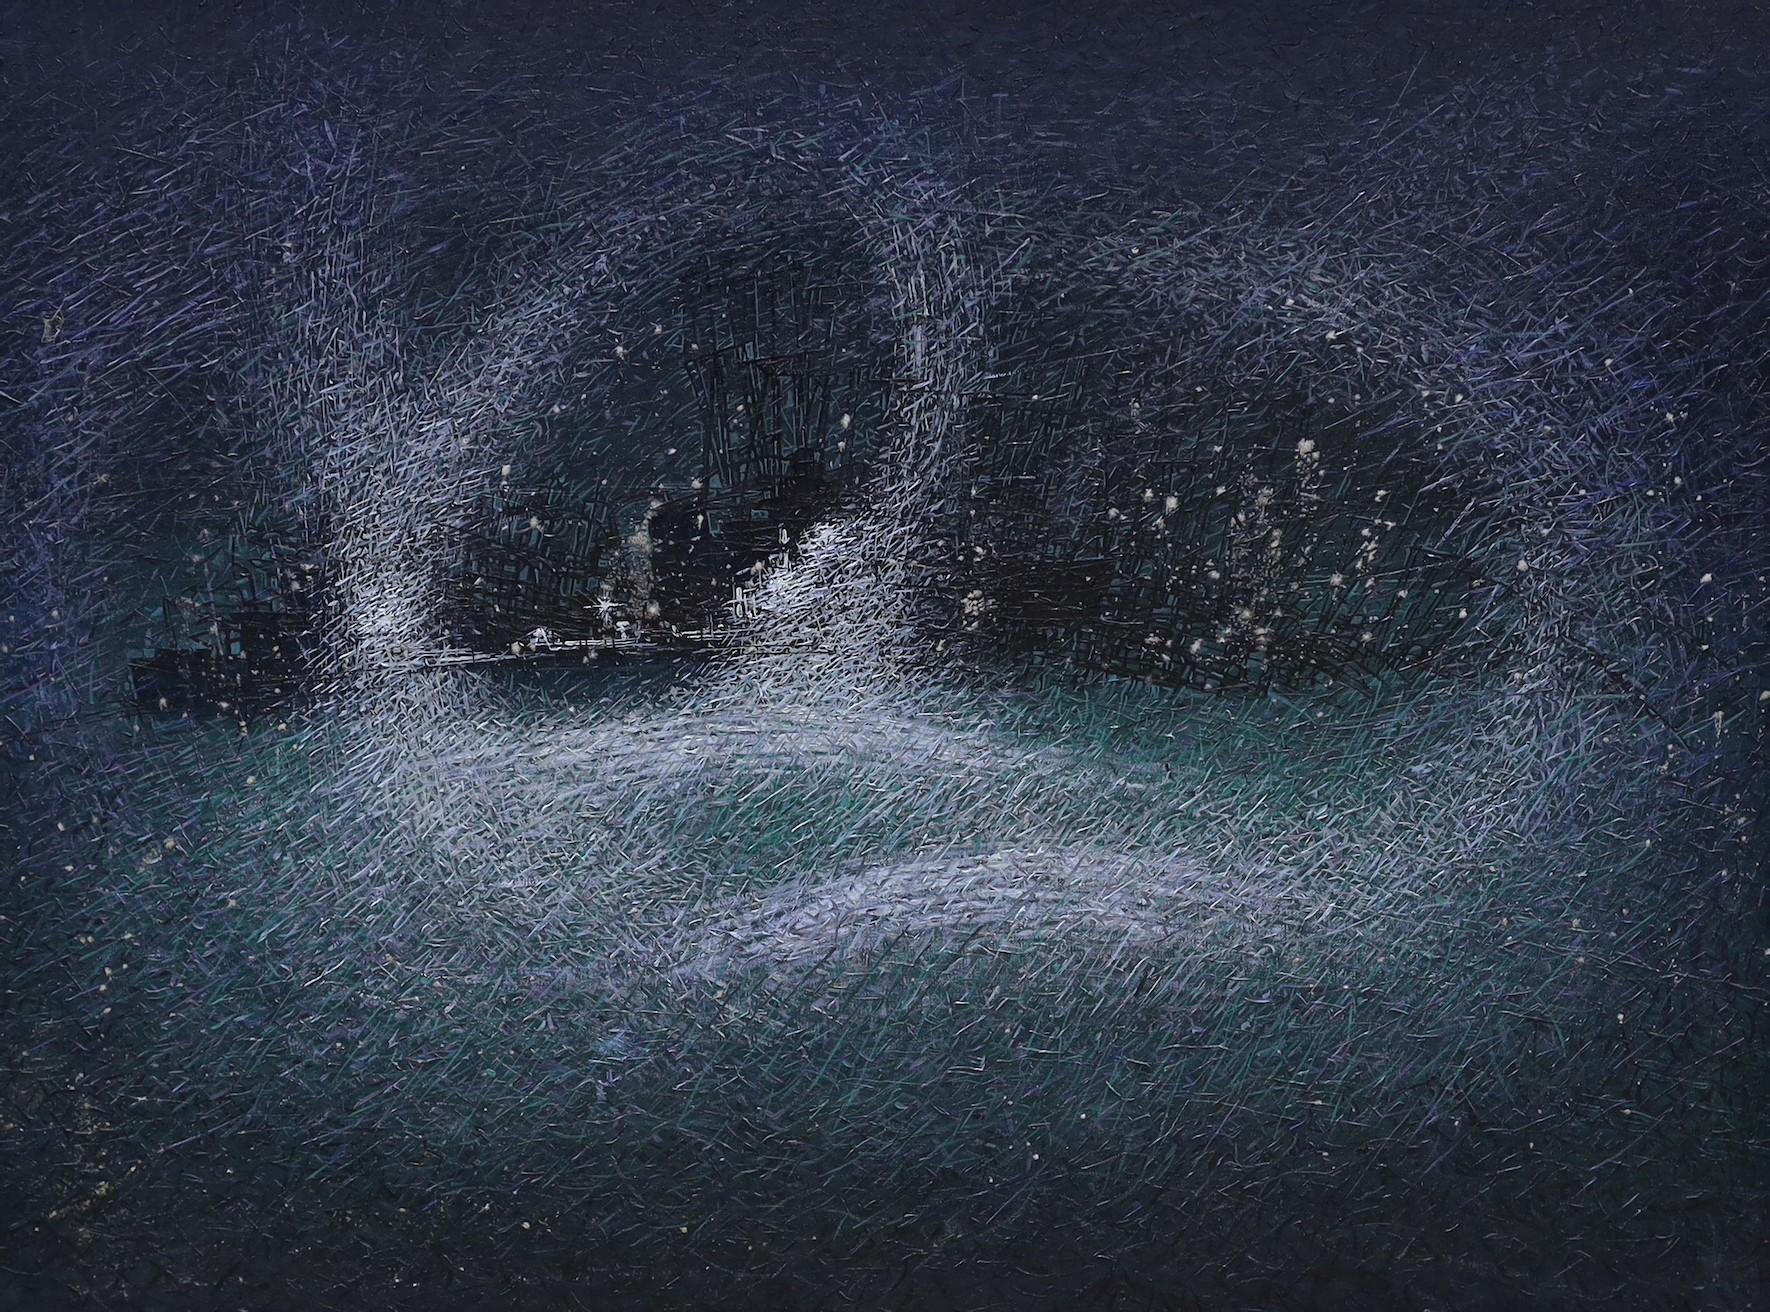 Walter Brettingham (1924-2002), oil on canvas, ‘Death of a Ship’, dated 1968, 72 x 98cm